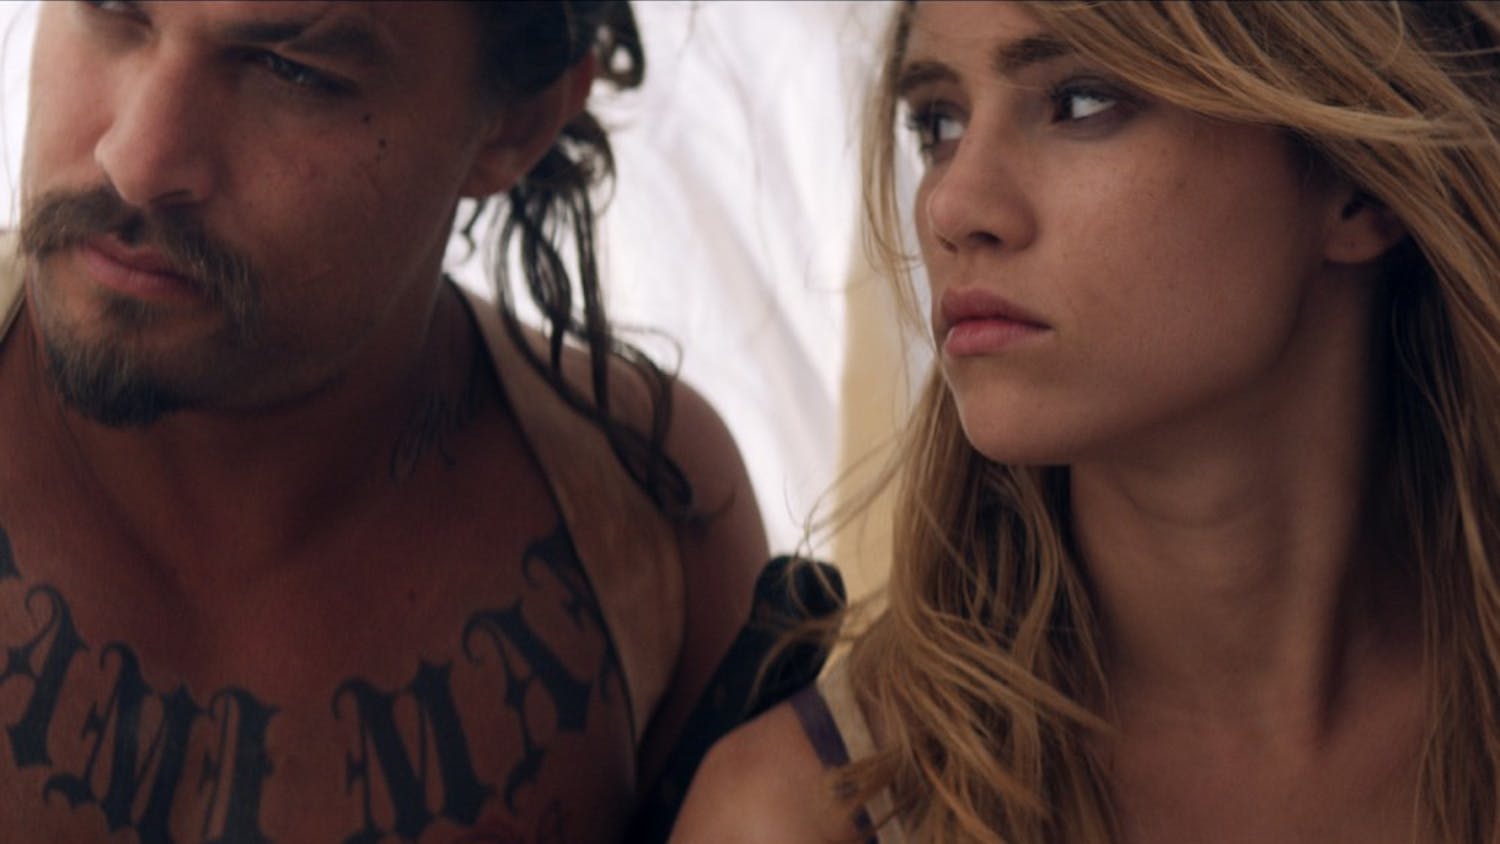 Jason Momoa and Suki Waterhouse star in "The Bad Batch," in theaters June 23.